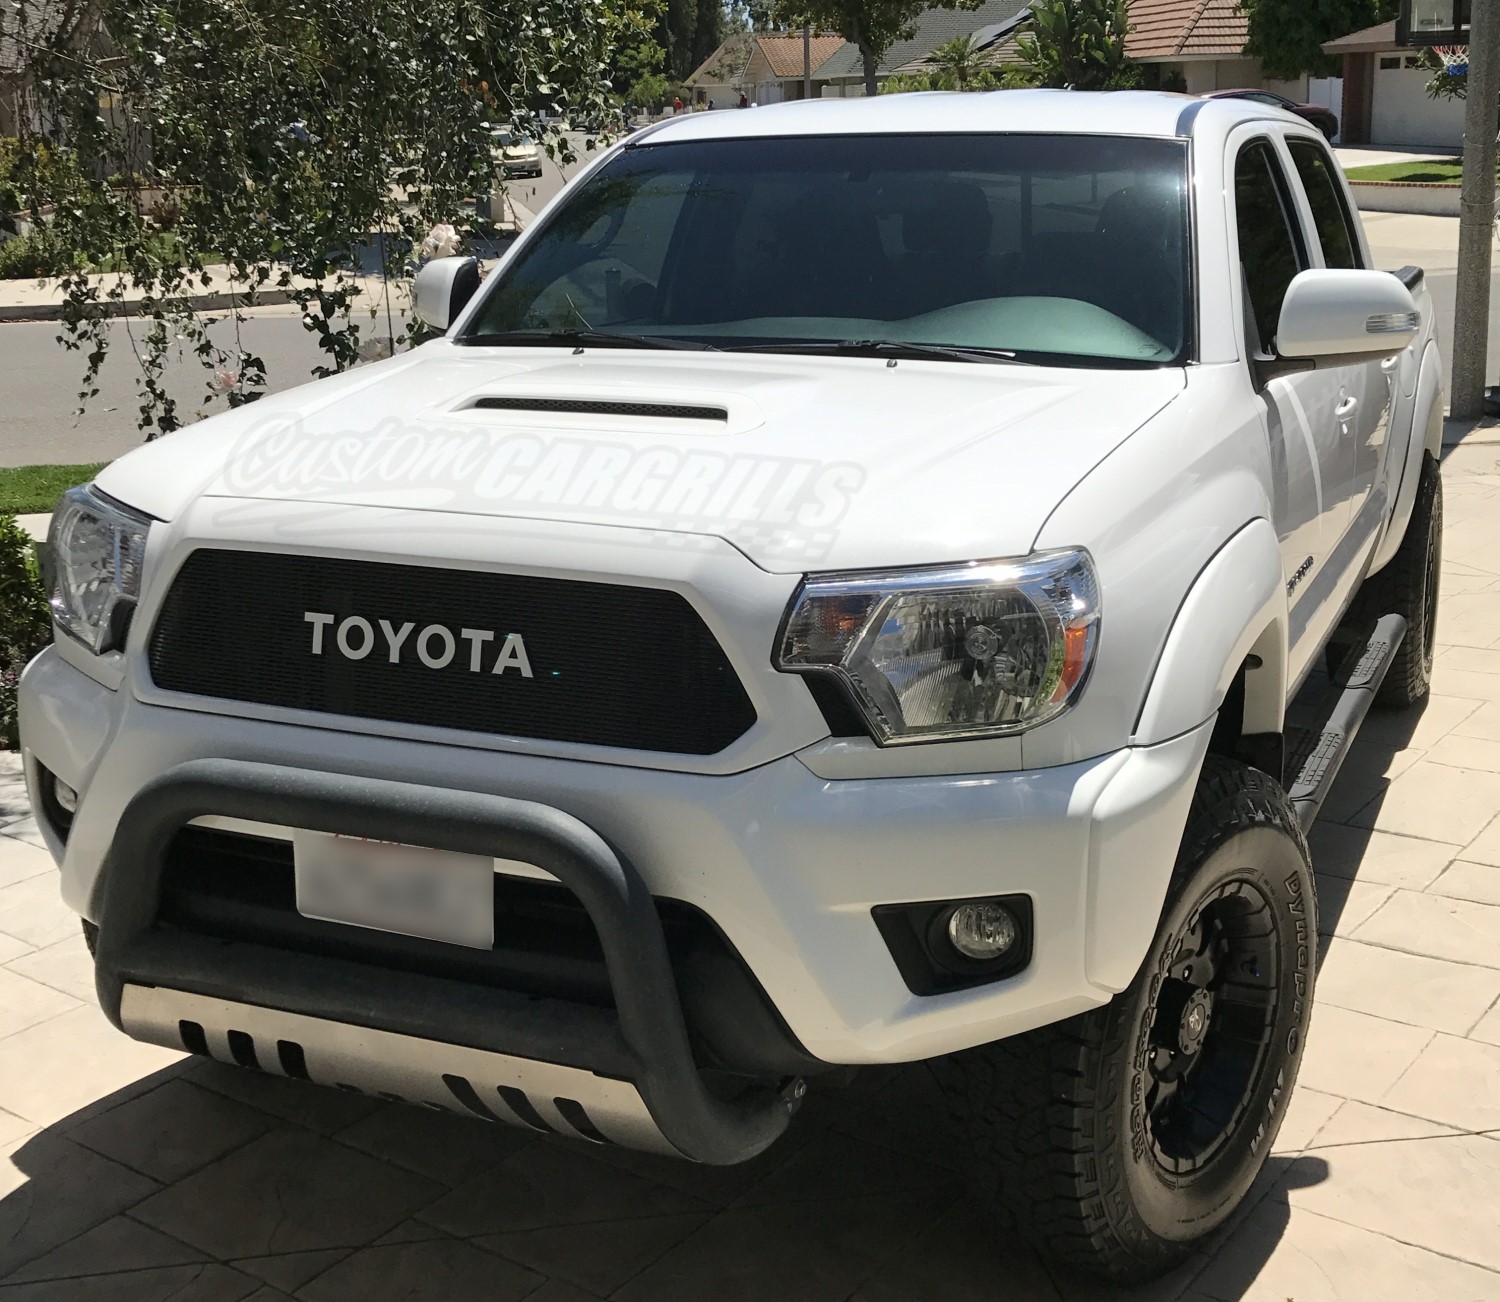 2012 - 2015 Toyota Tacoma Grill Mesh With Toyota Emblem #2